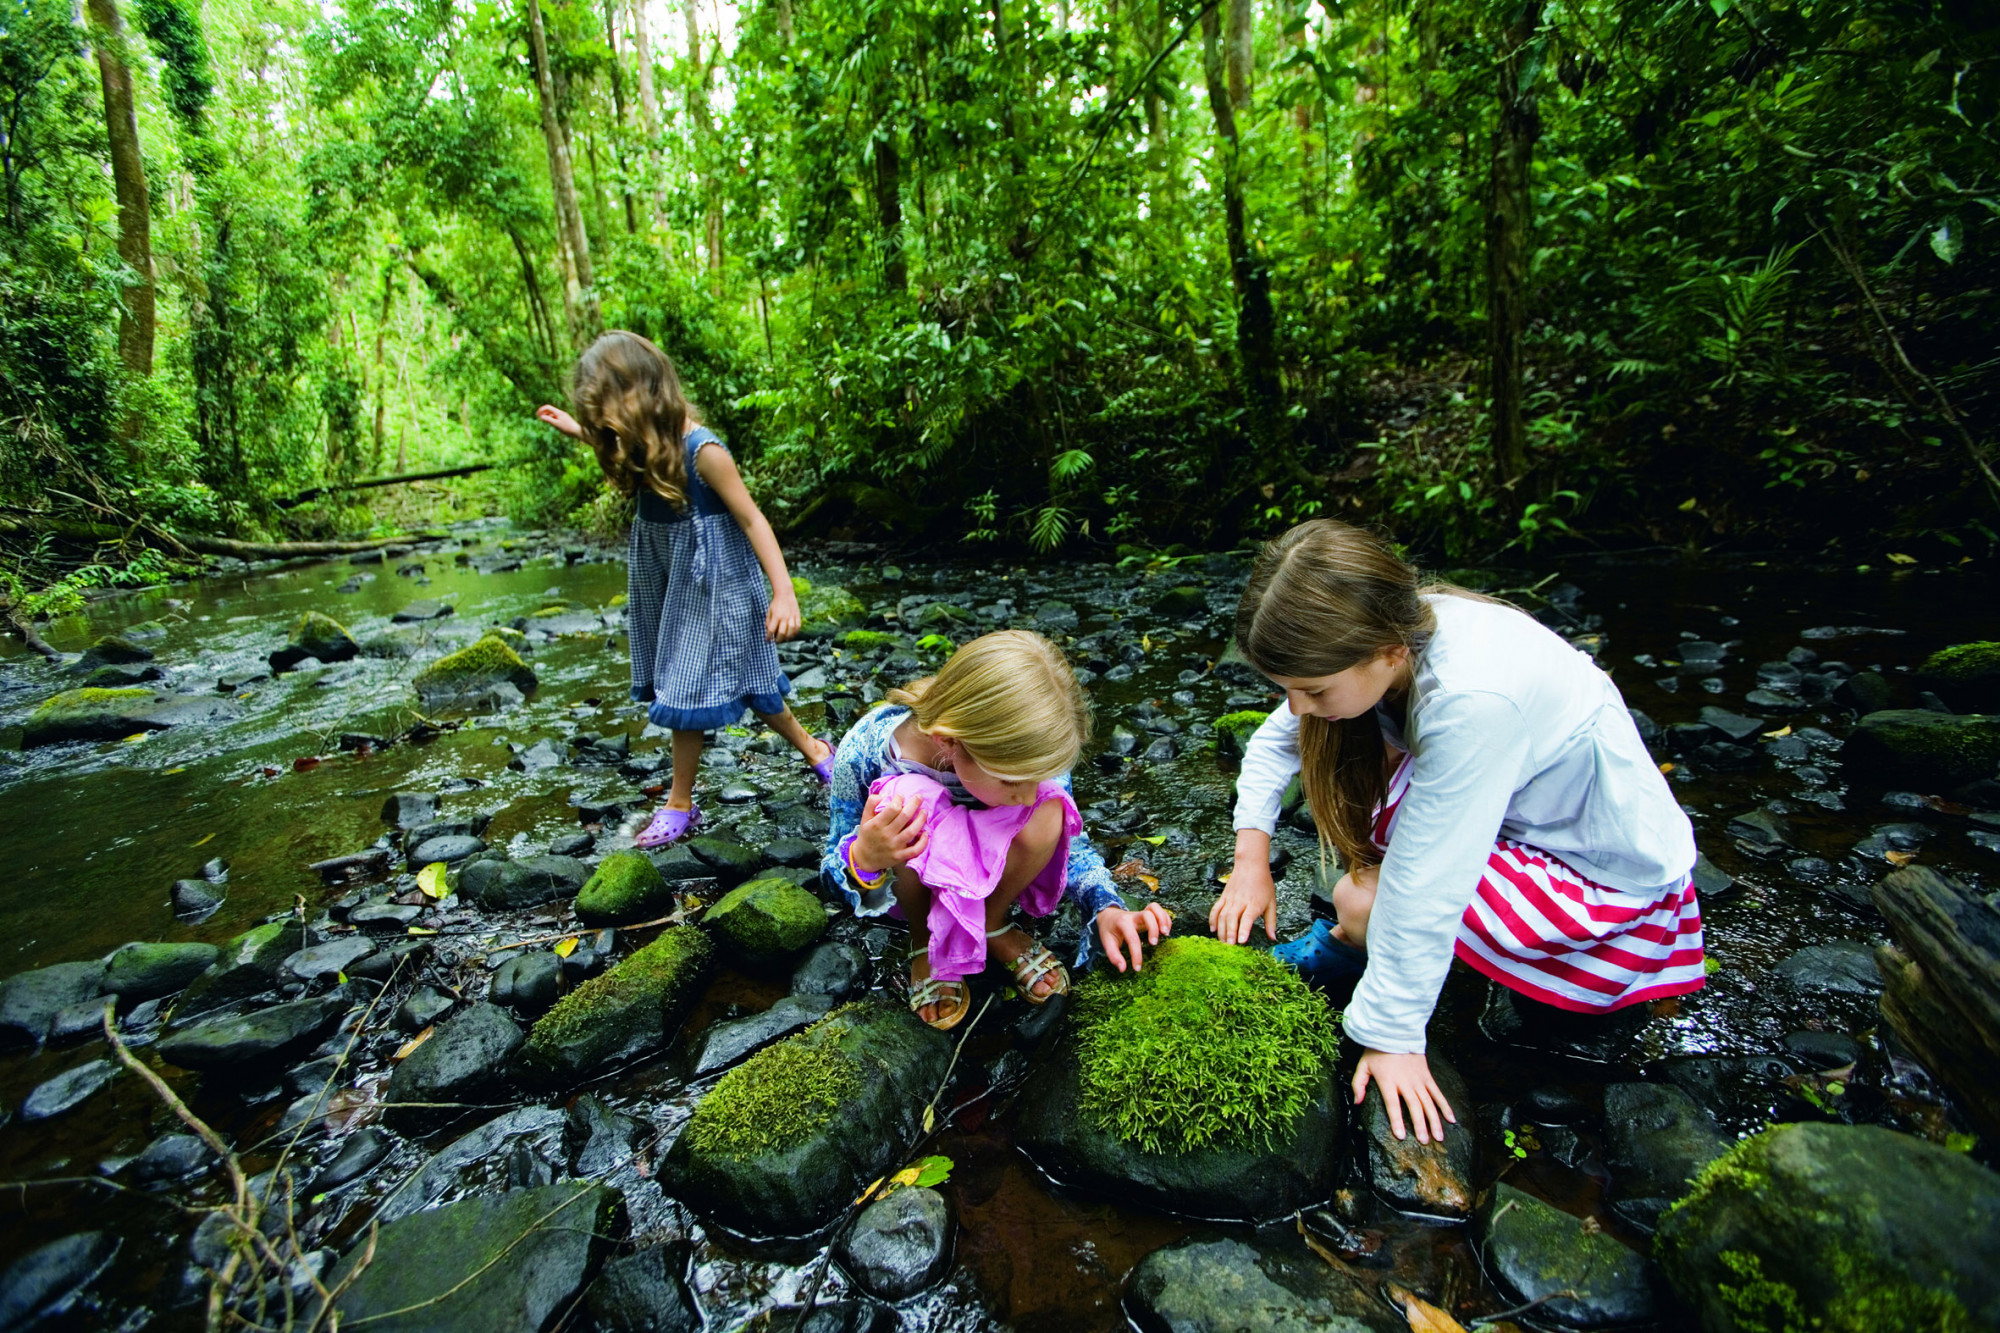 Weekend Getaway - A wonderful world of adventure awaits at the Mossman Gorge - feature photo